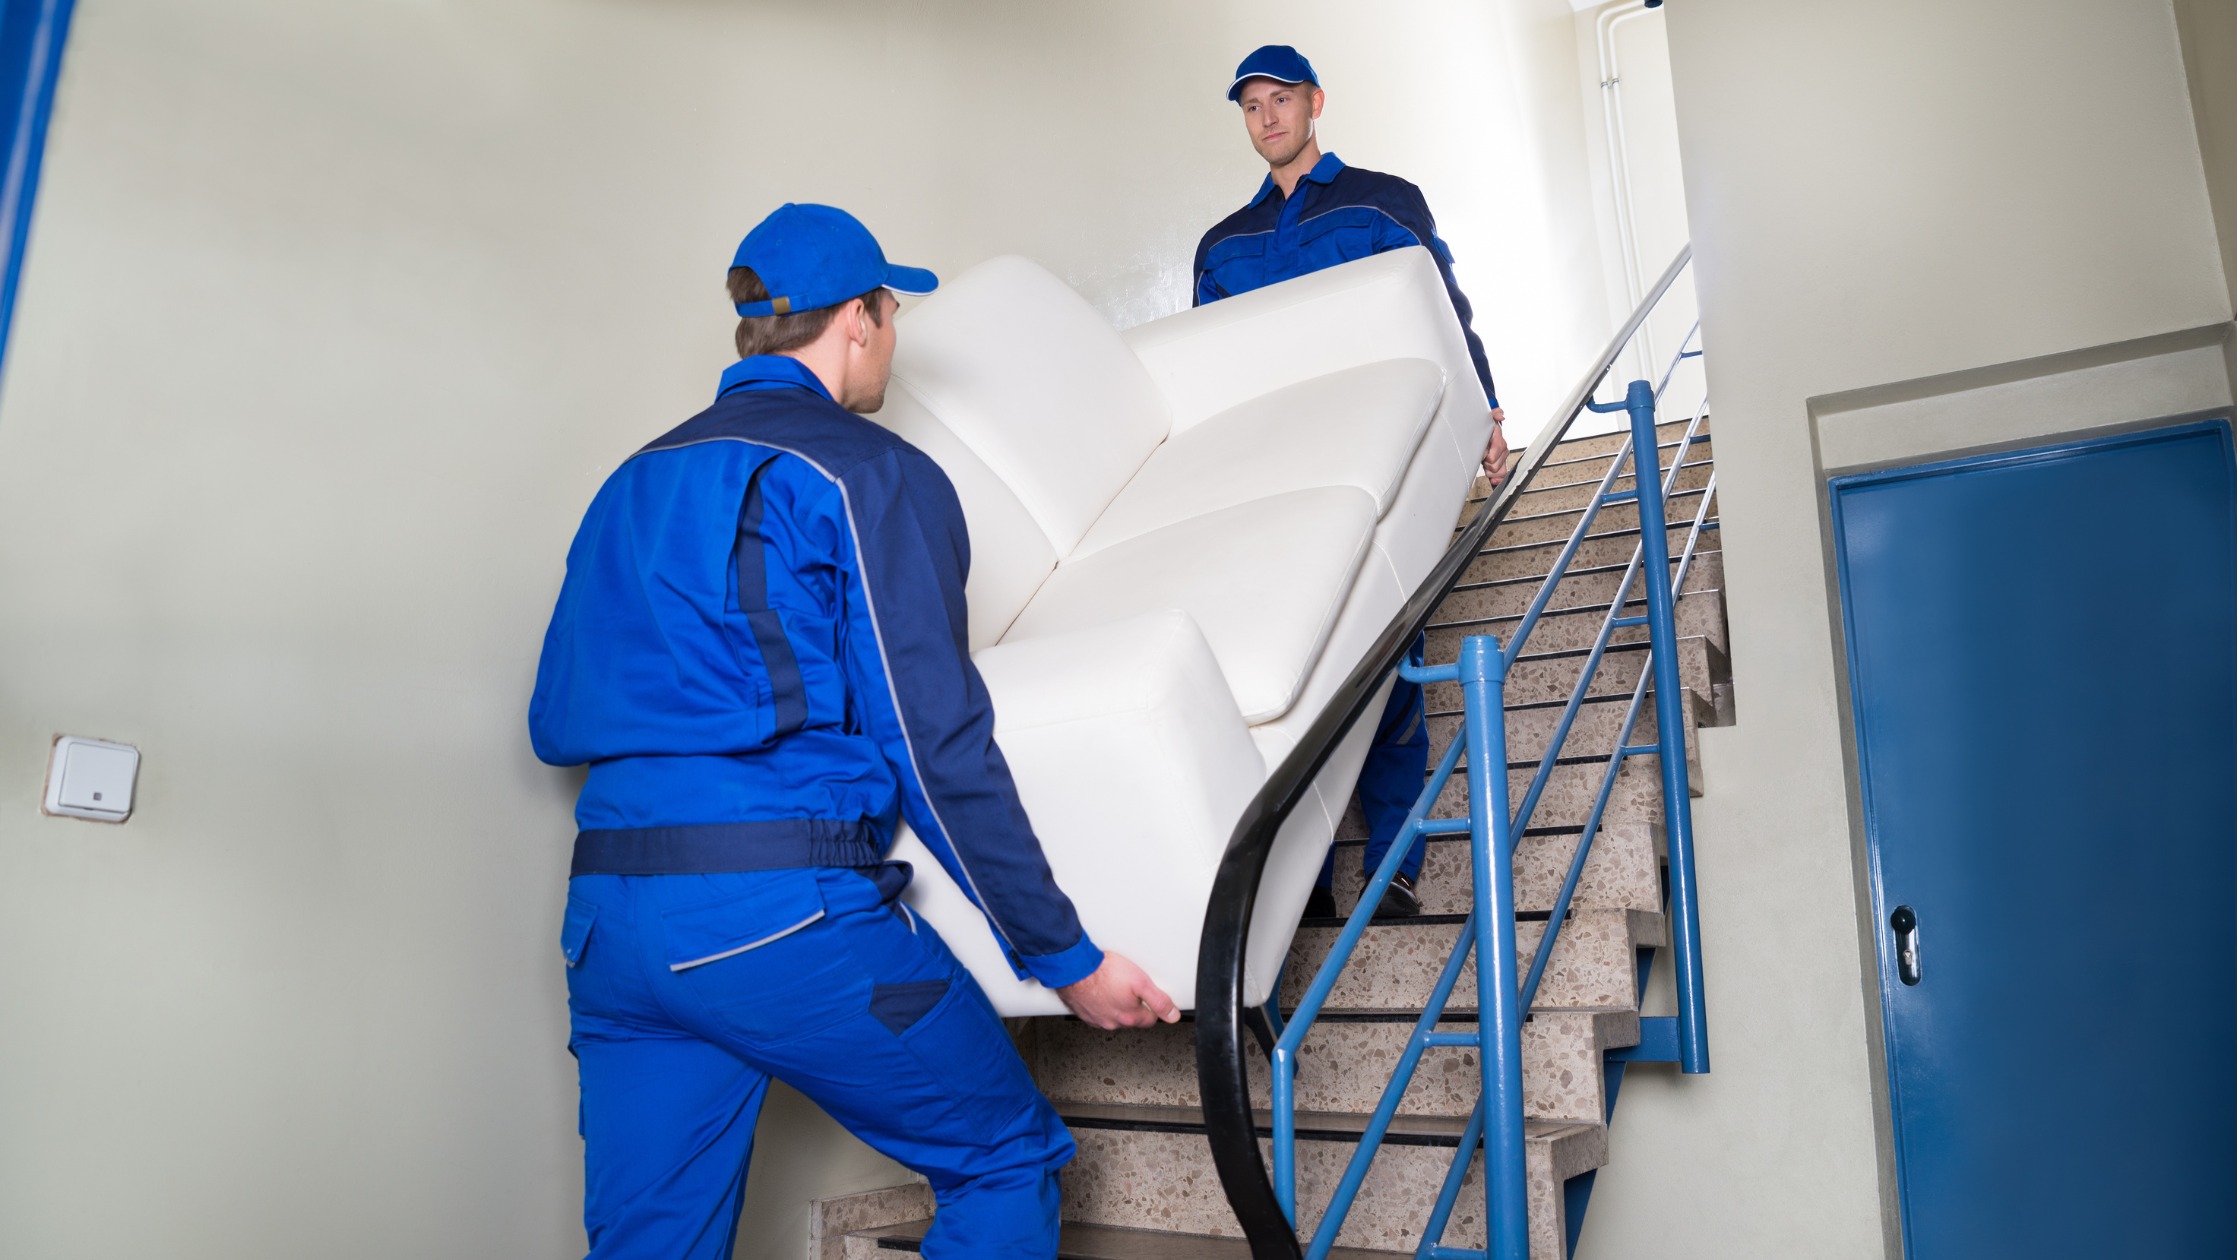 How to Find Best removalists & Energy Providers for Your New House